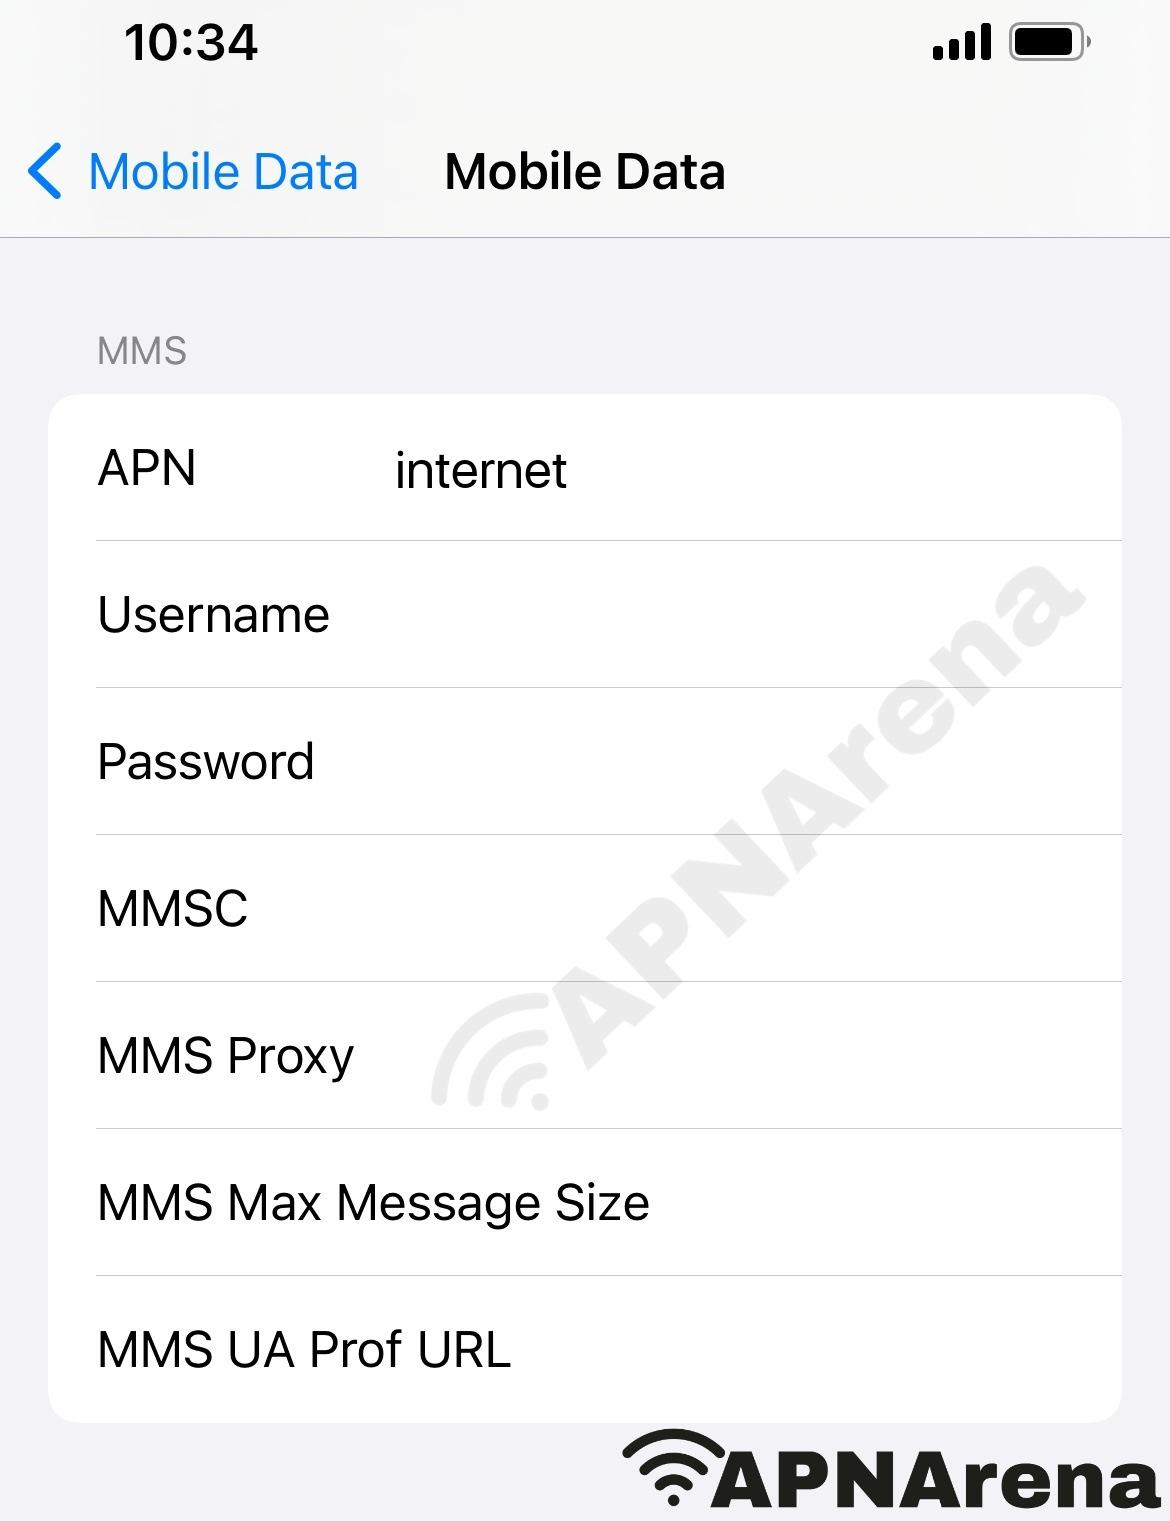 Desi Mobile MMS Settings for iPhone